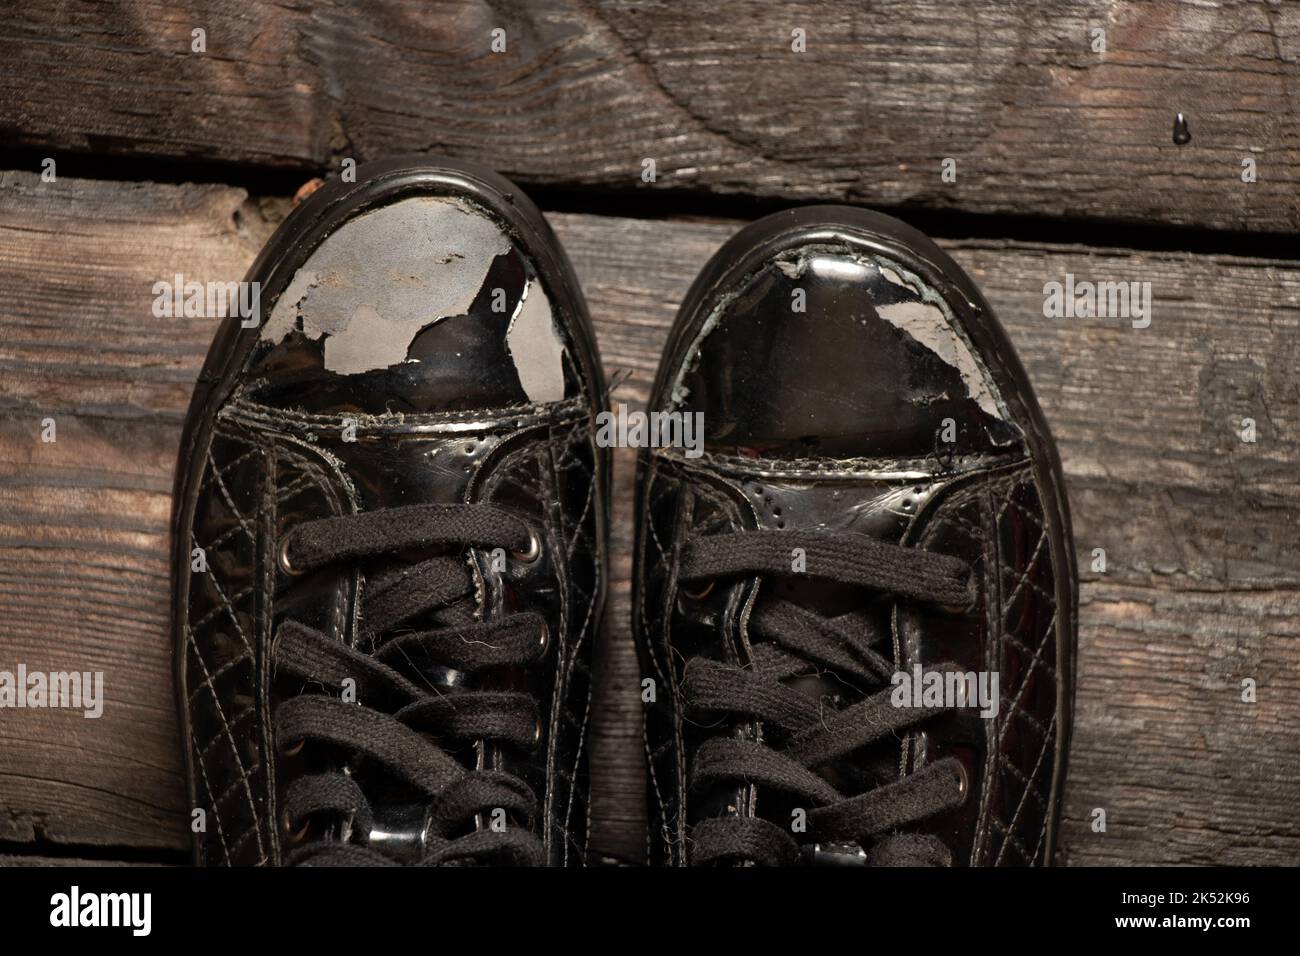 old patent torn shoes on a wooden floor, womens shoes, torn shoes Stock Photo